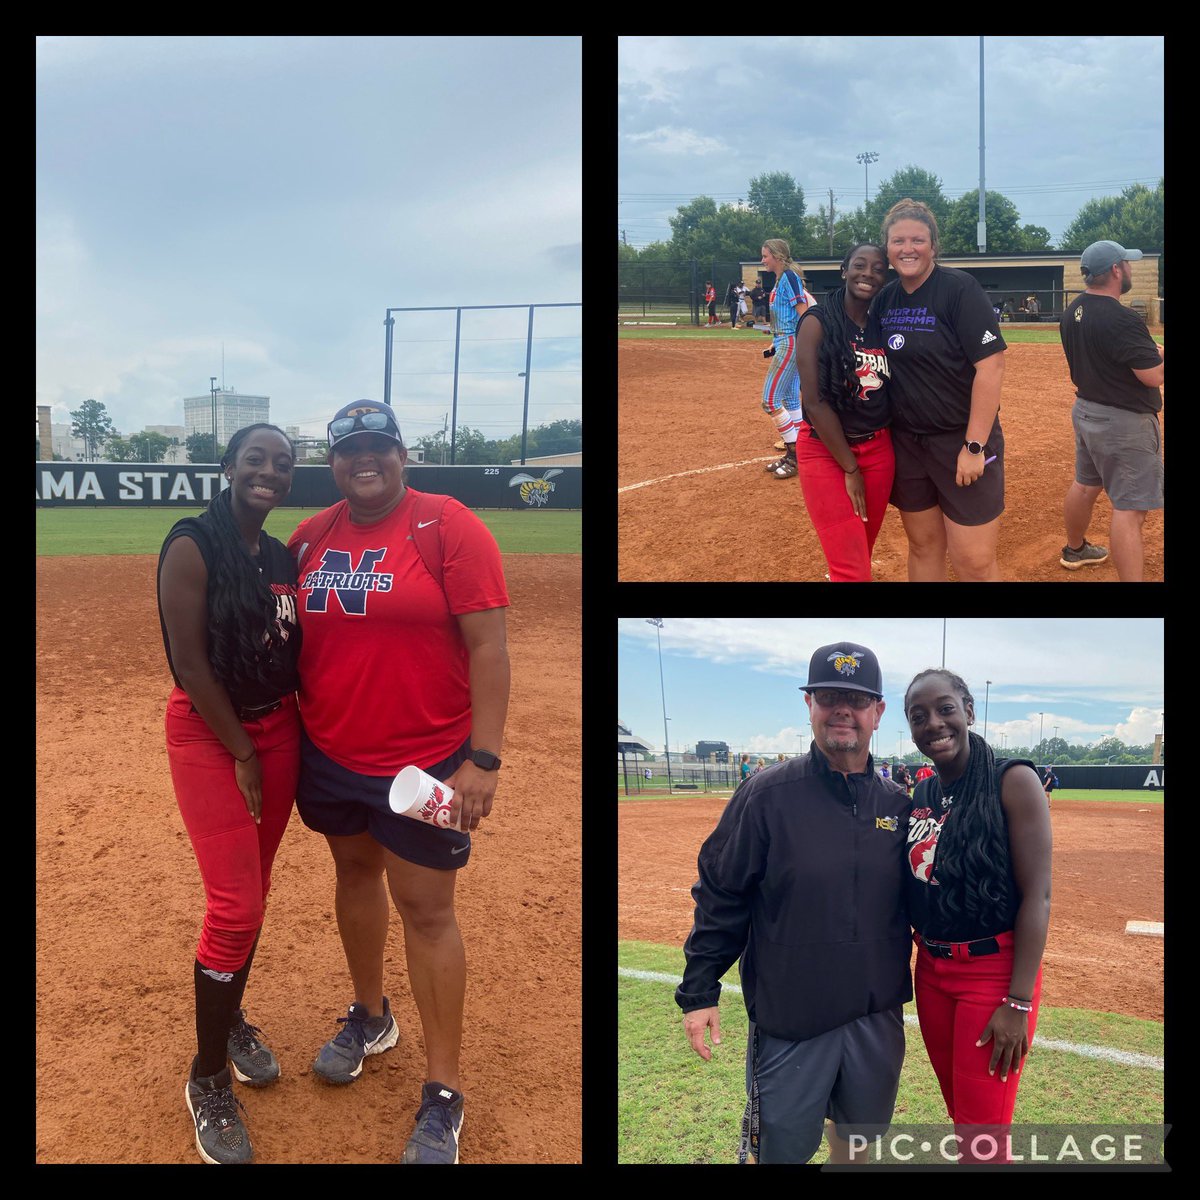 What Great day of softball!! Missed some of the coaches for pictures but I’m greatfull to them all for the amazing tips and feedback. @Coach_T_Bradley @coachangelbrown @CoachHawkinsUNA @RyanIamurri32 @AllySilva7 @CoachDobbinsSCD